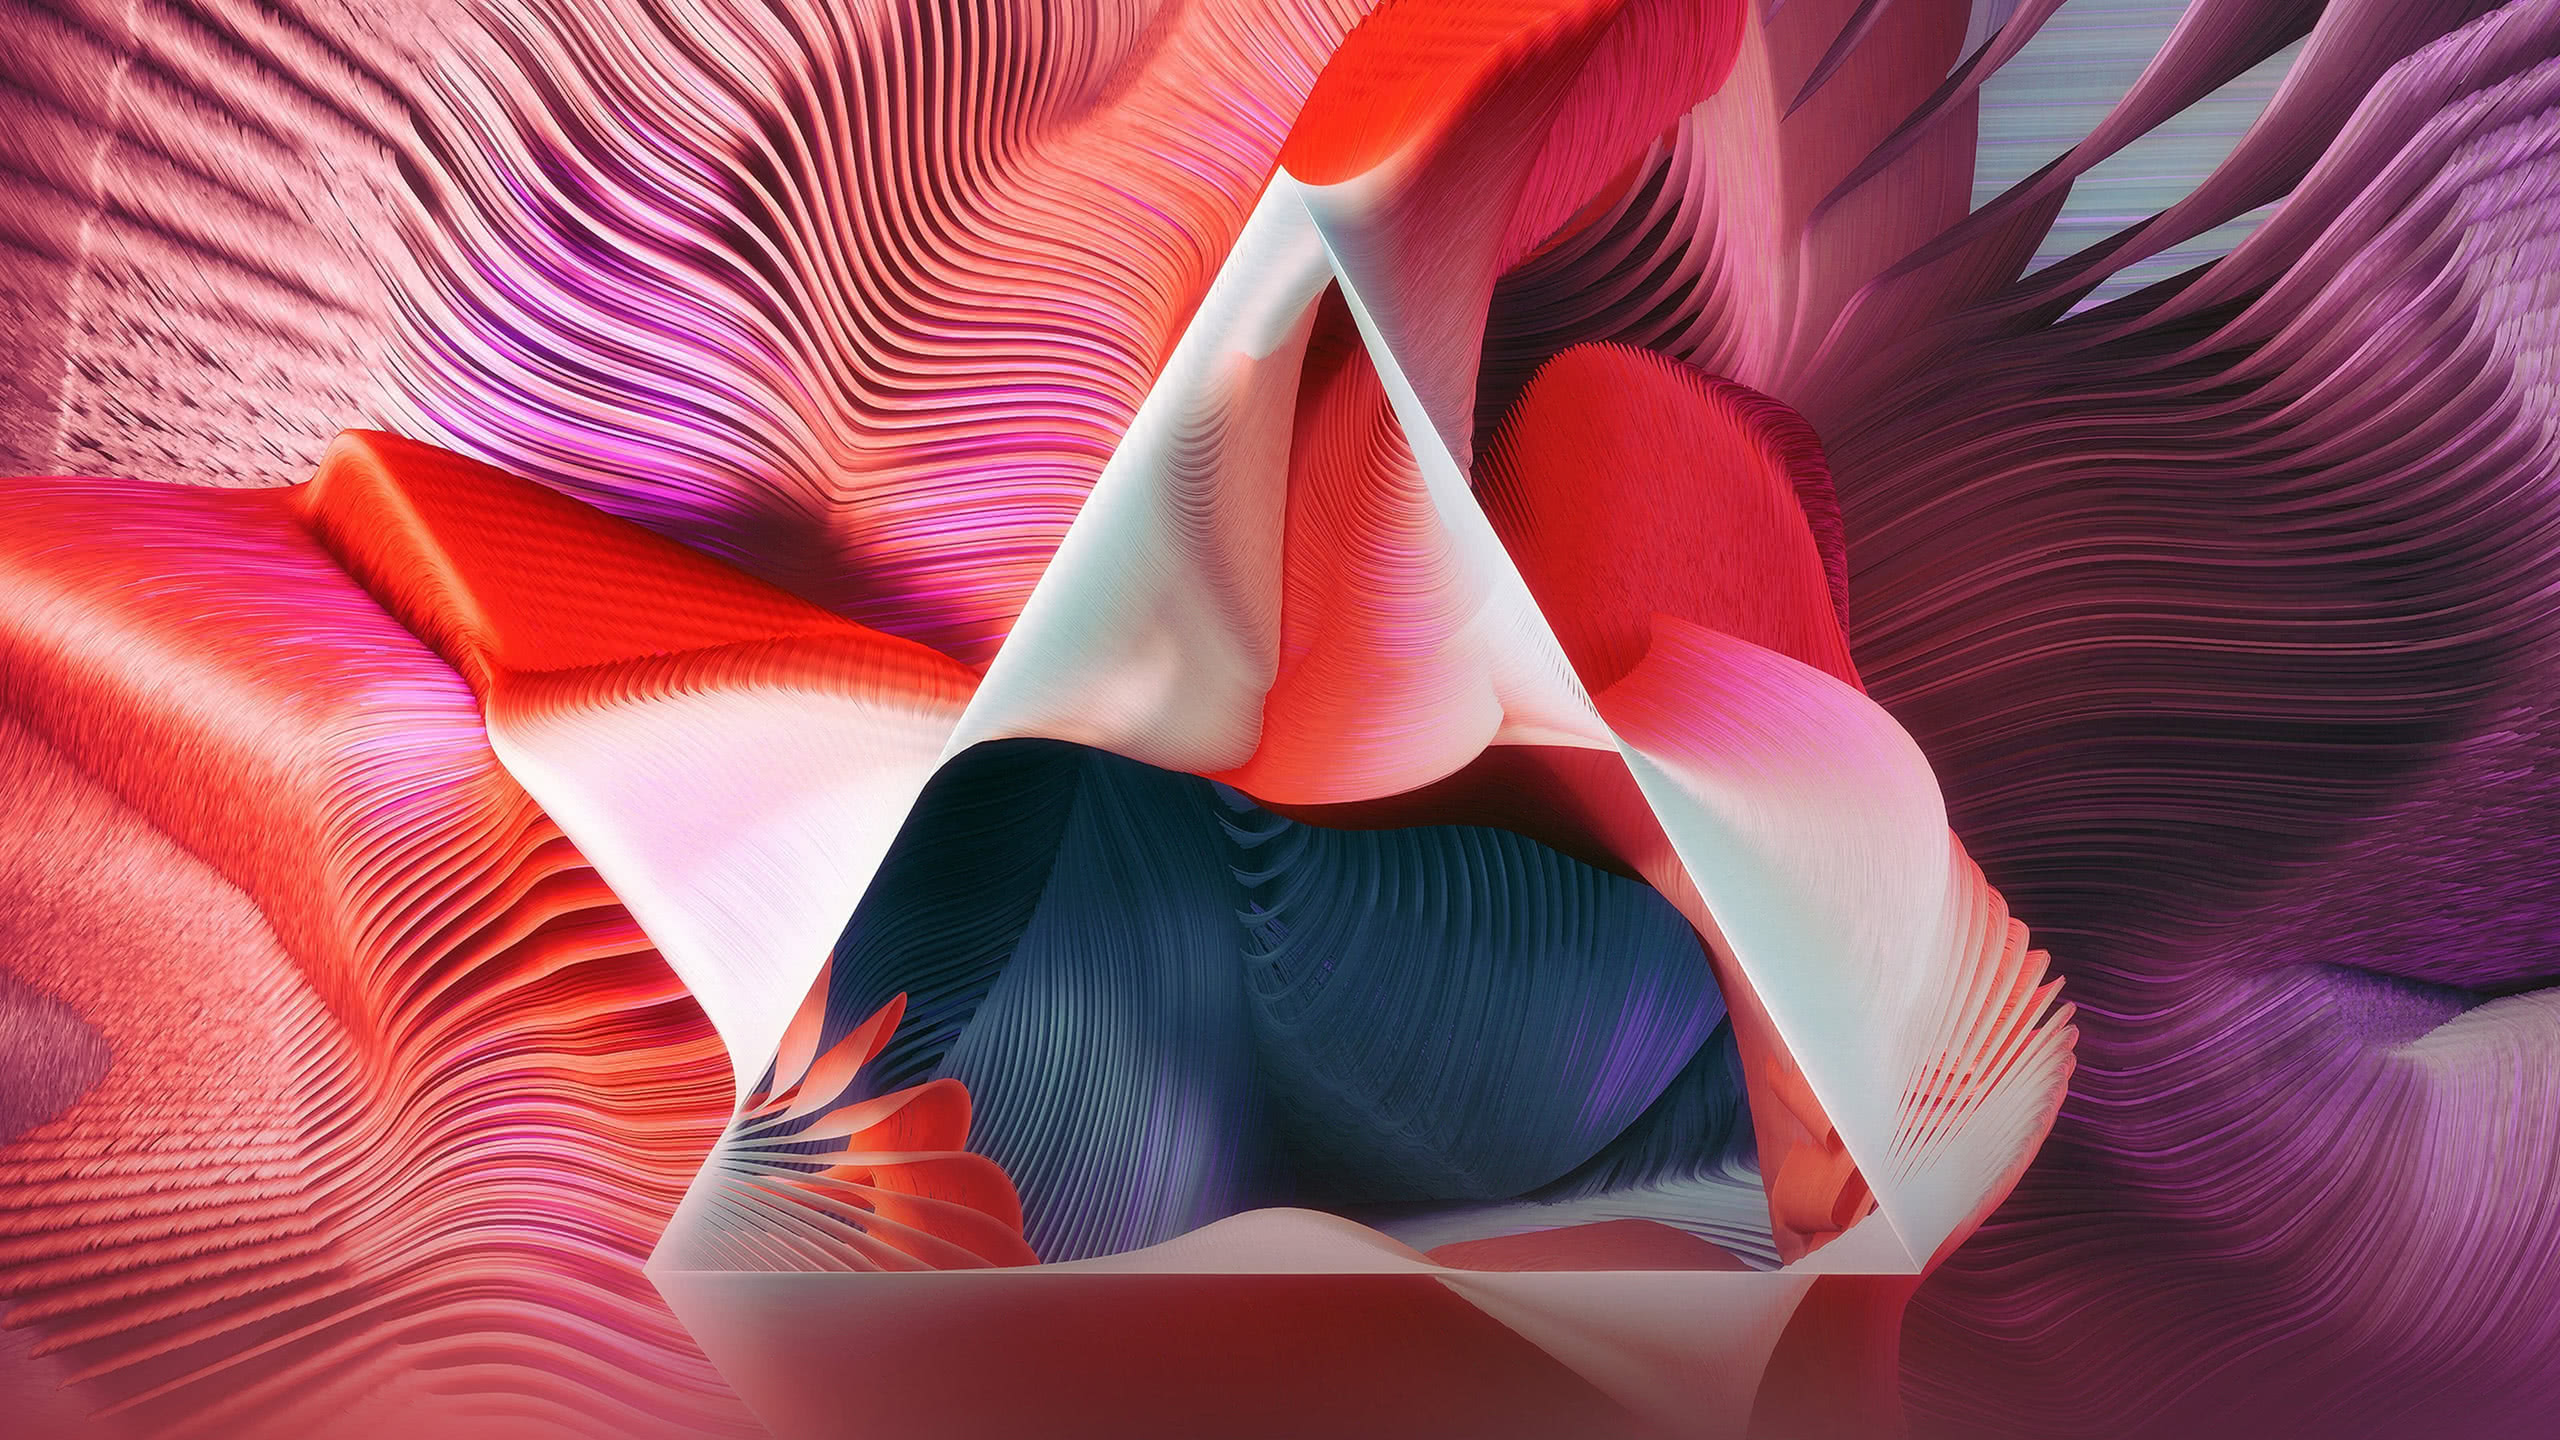 3d Colorful Spiral Swirl Triangle 2560x1440